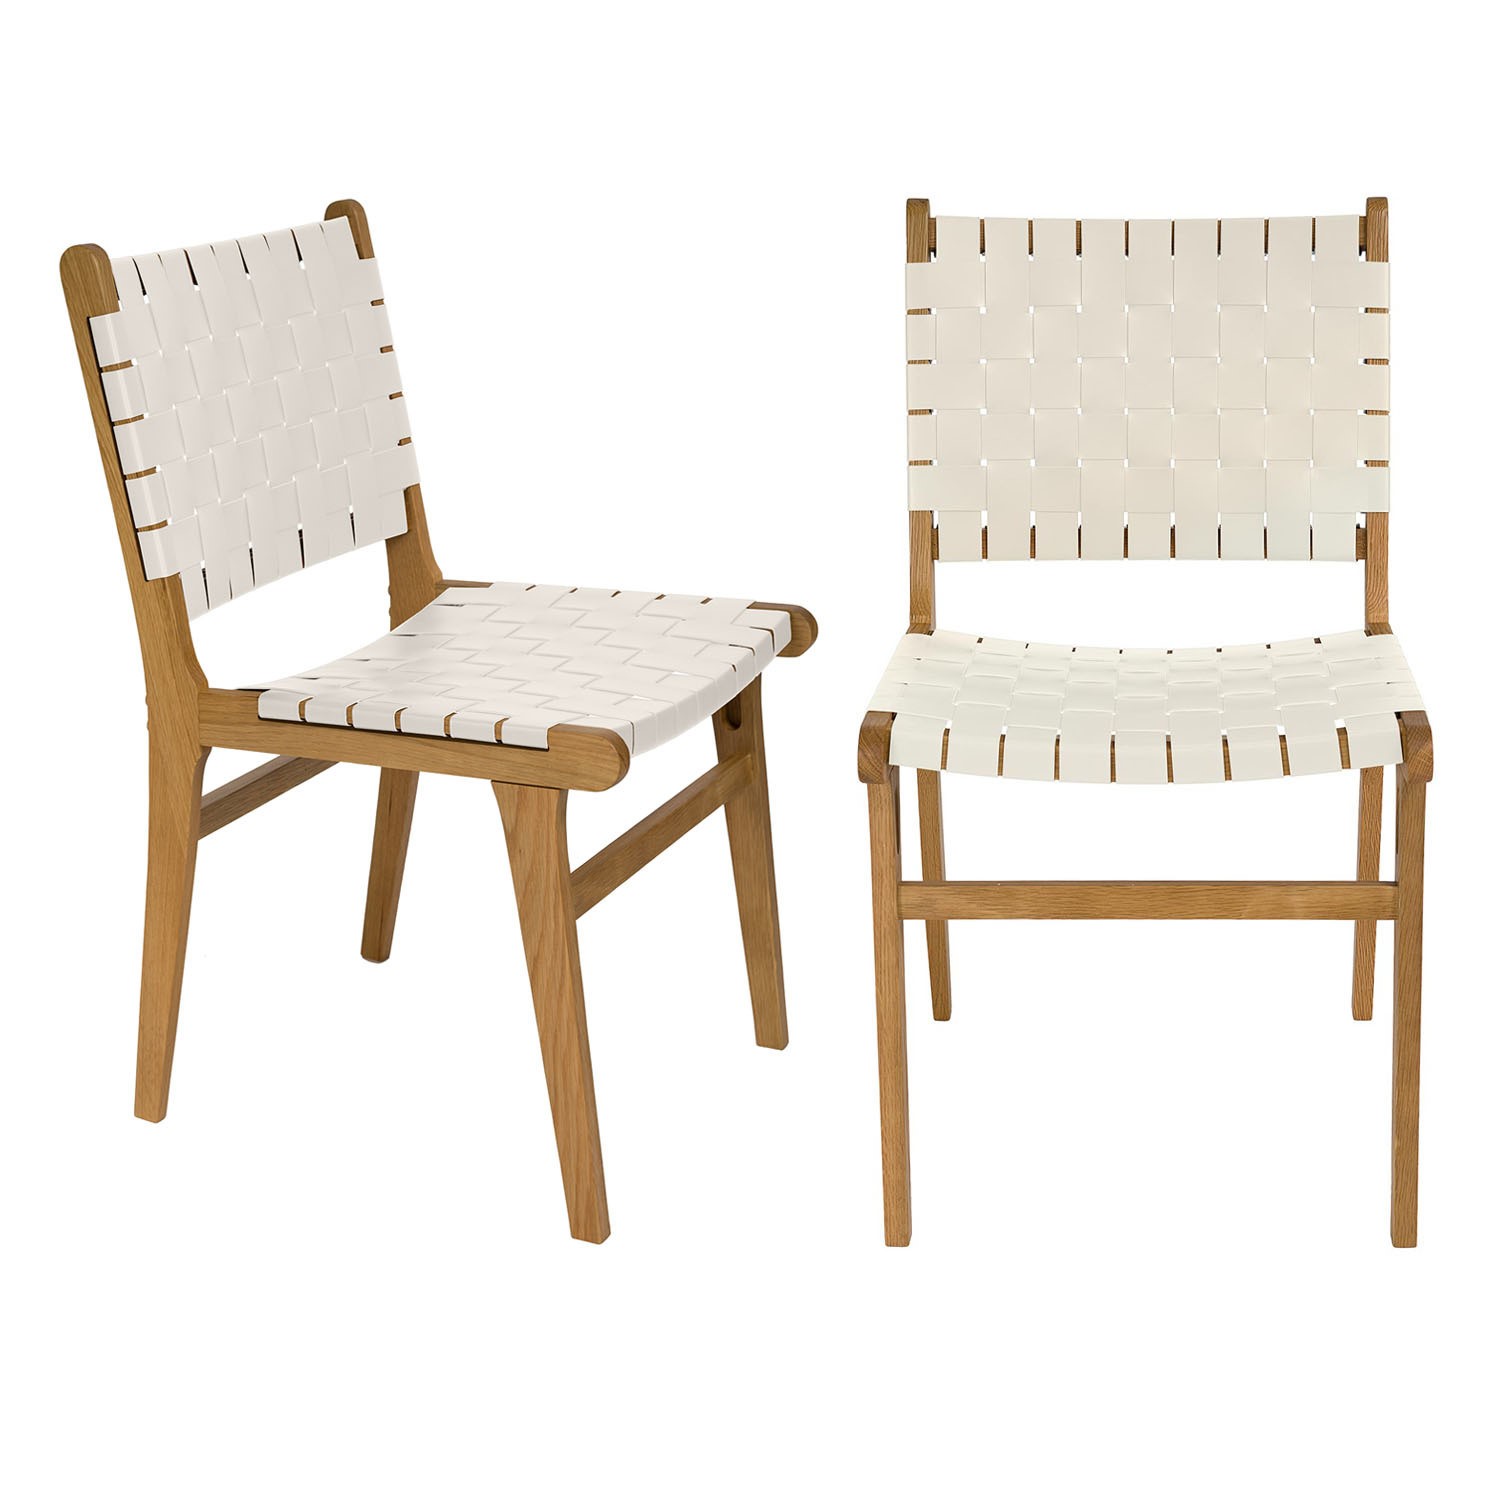 Photo of Set of 2 cream faux leather woven dining chairs - bree